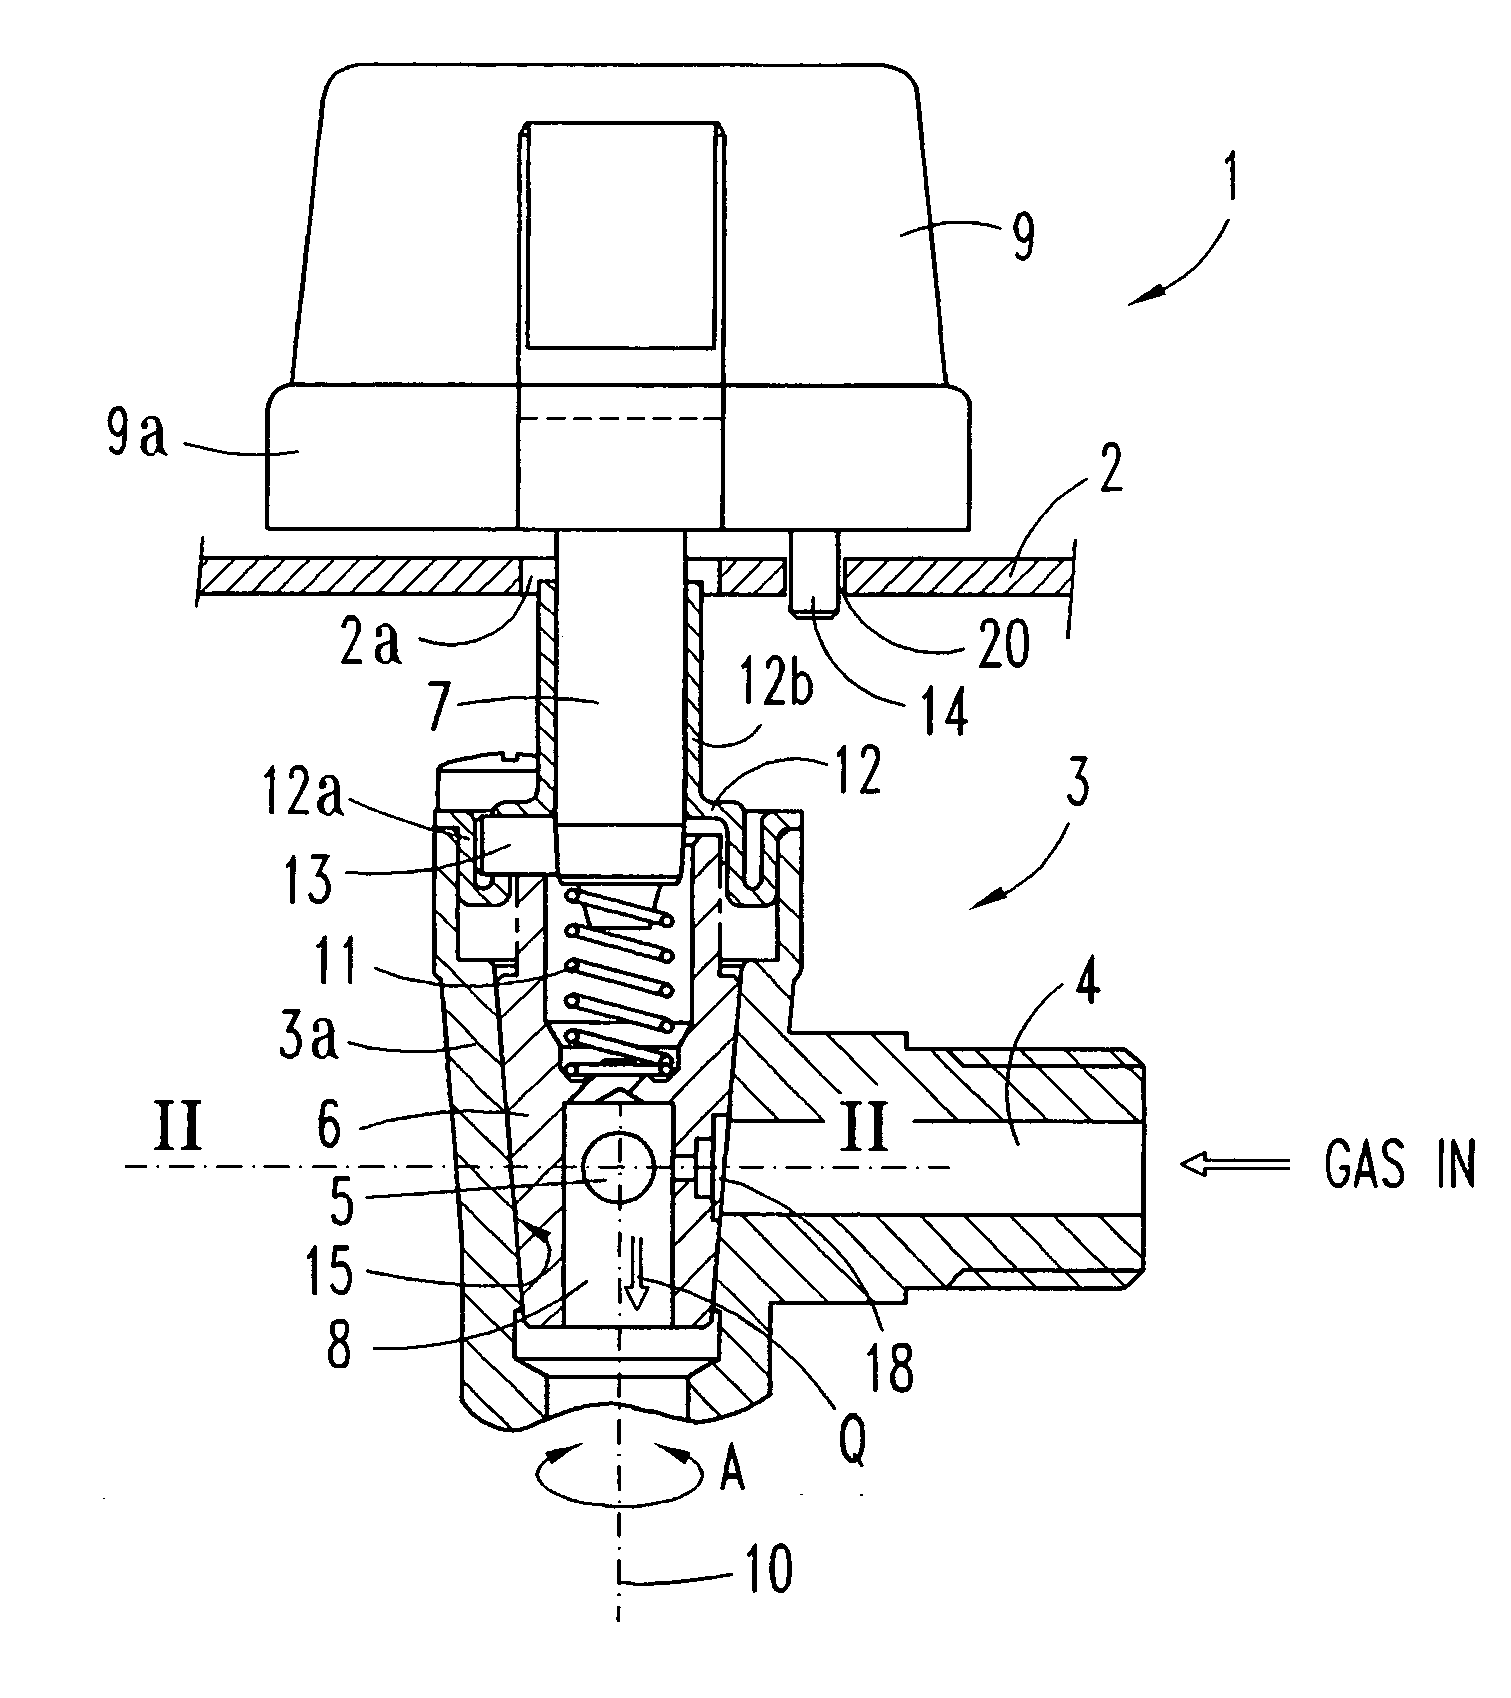 Rotary valve in a multi-gas cooker